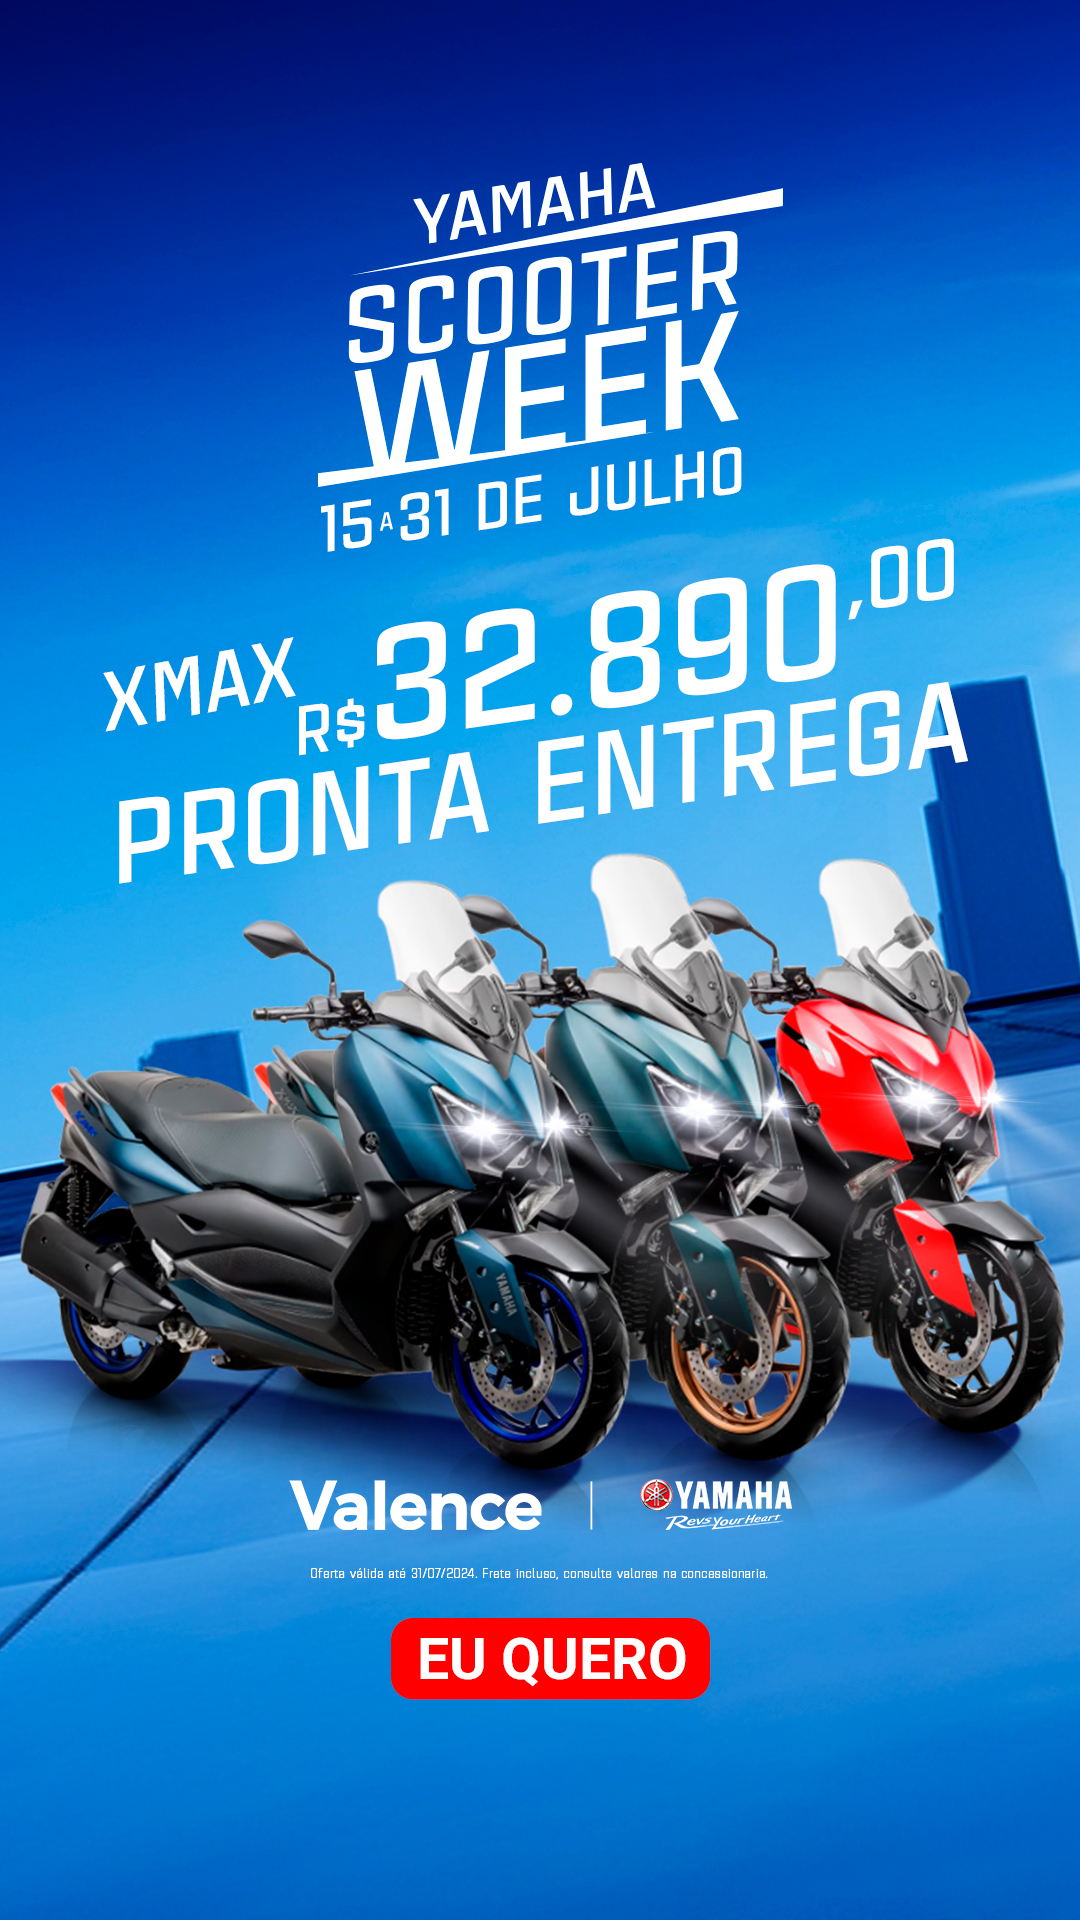 XMAX SCOOTER WEEK